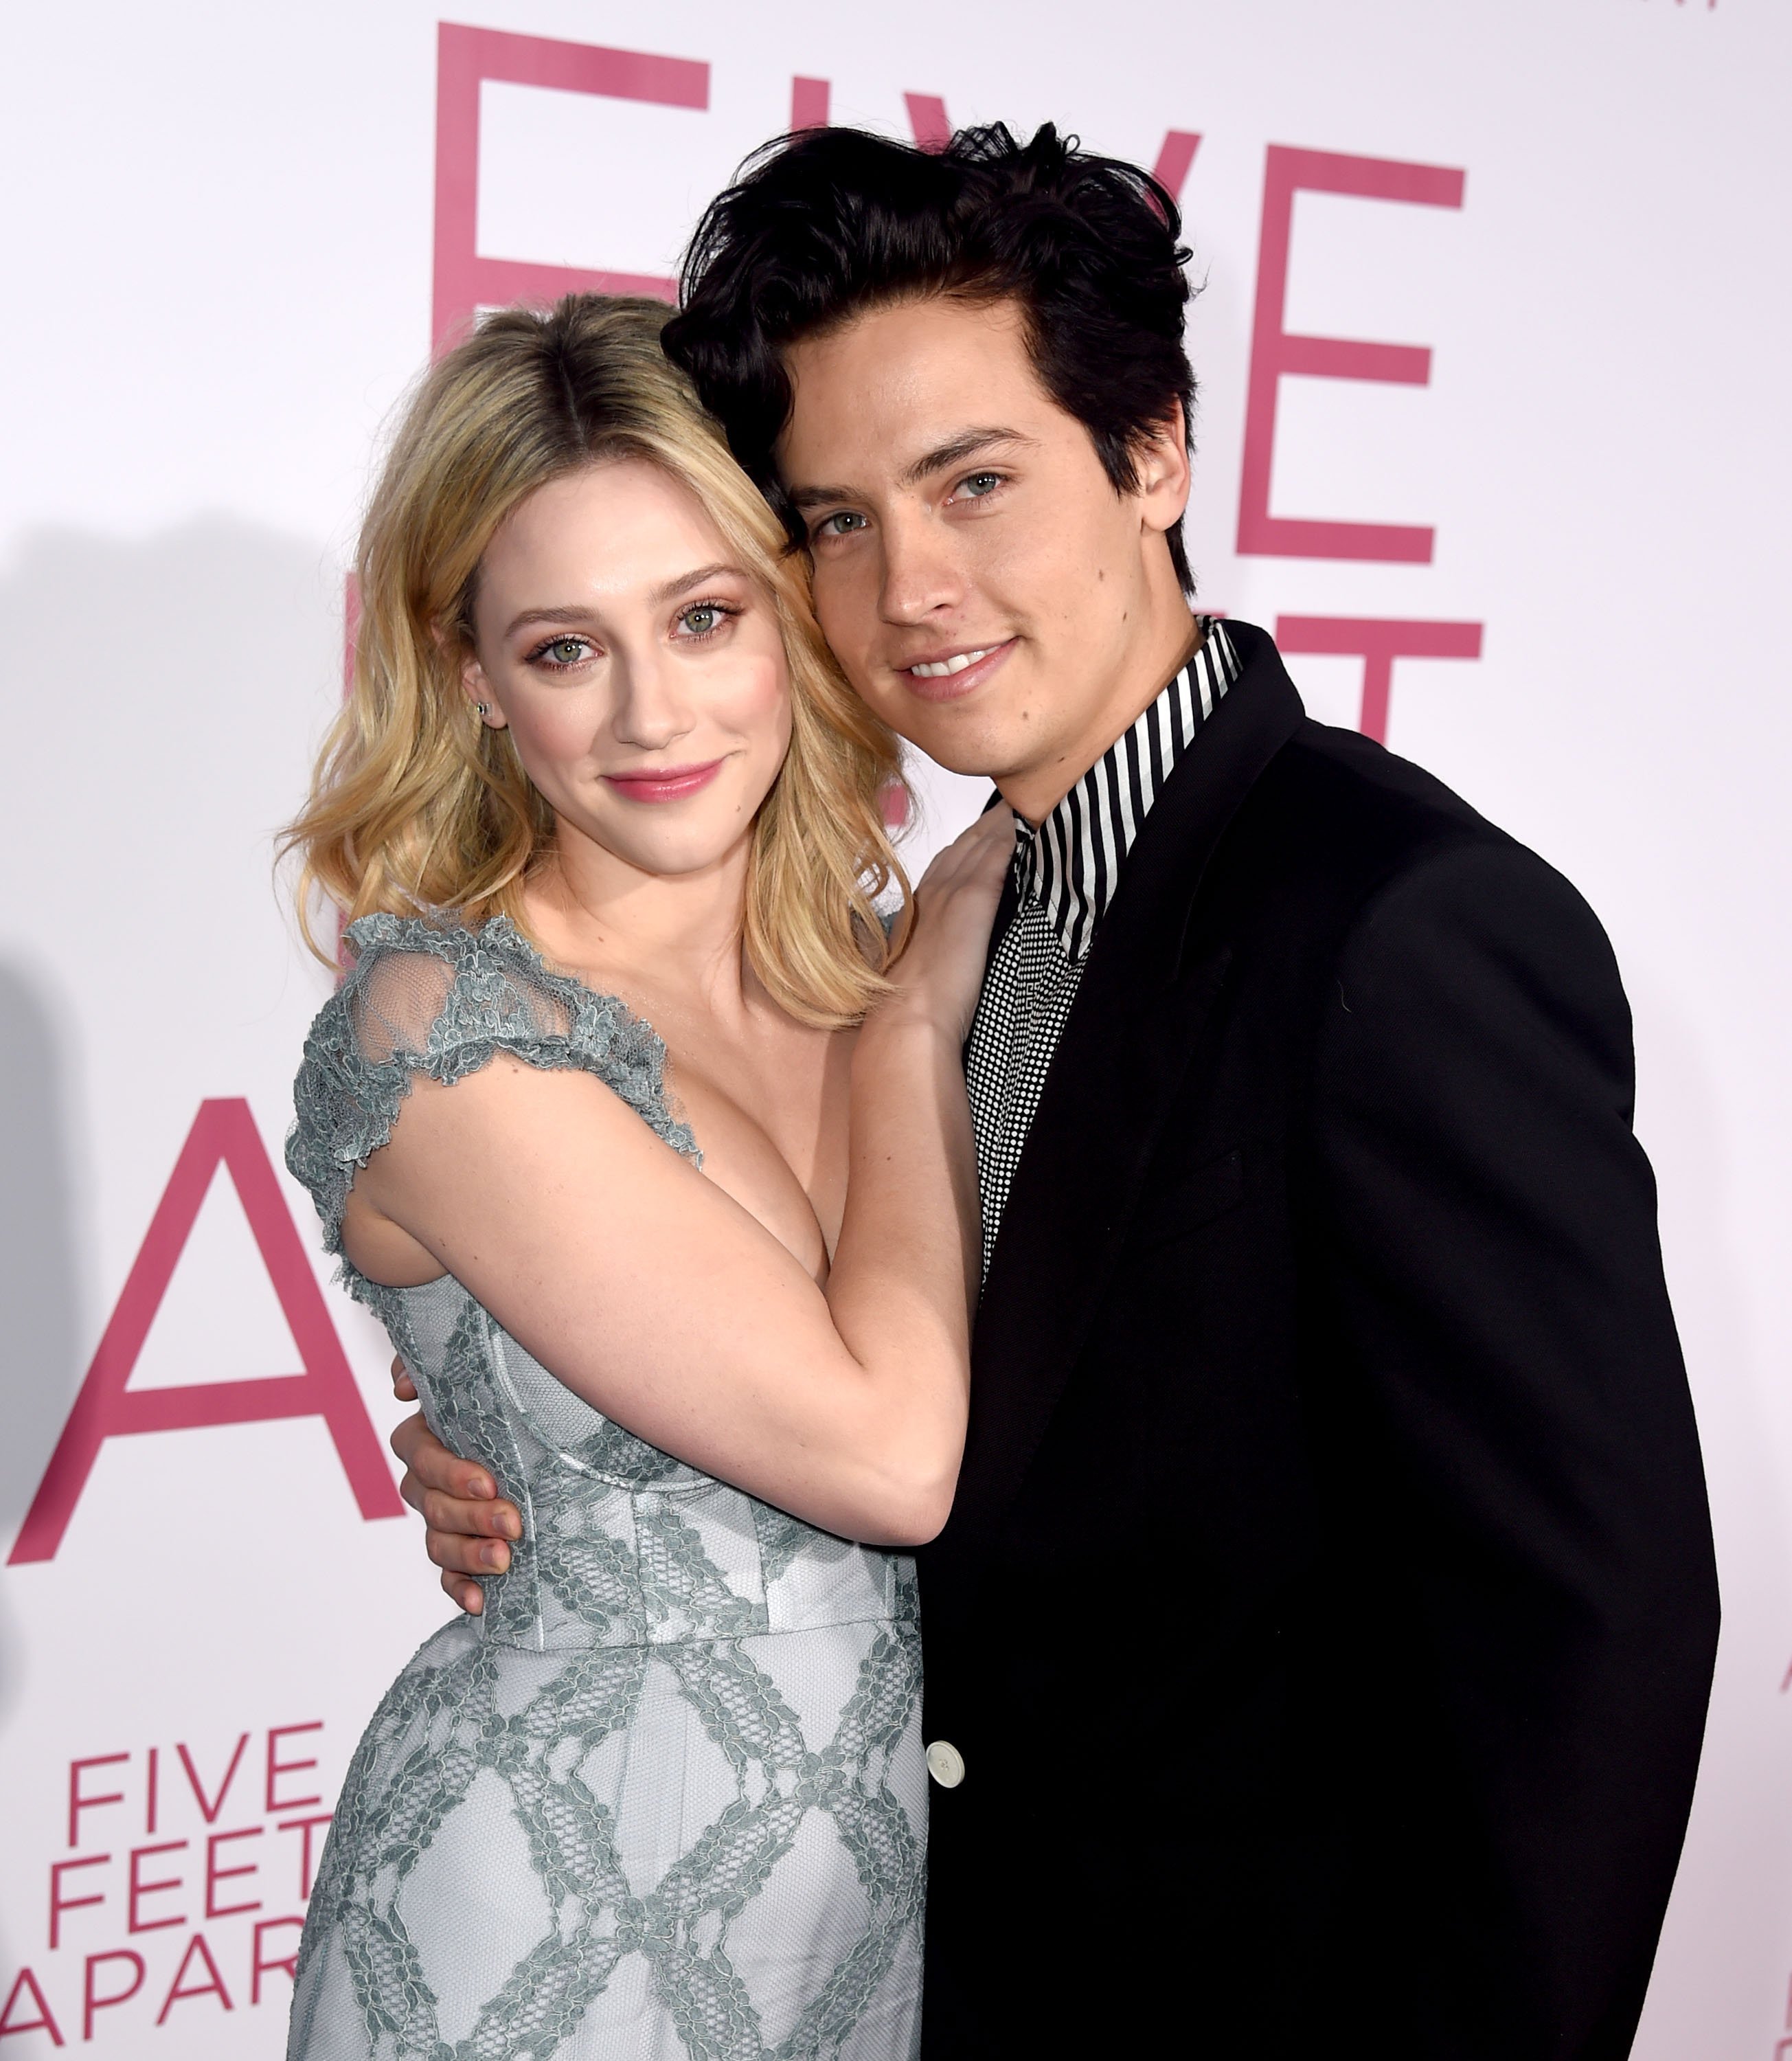 Lili Reinhart and Cole Sprouse at the "Five Feet Apart" film premiere on March 7, 2019, in Los Angeles, California. | Source: Getty Images 